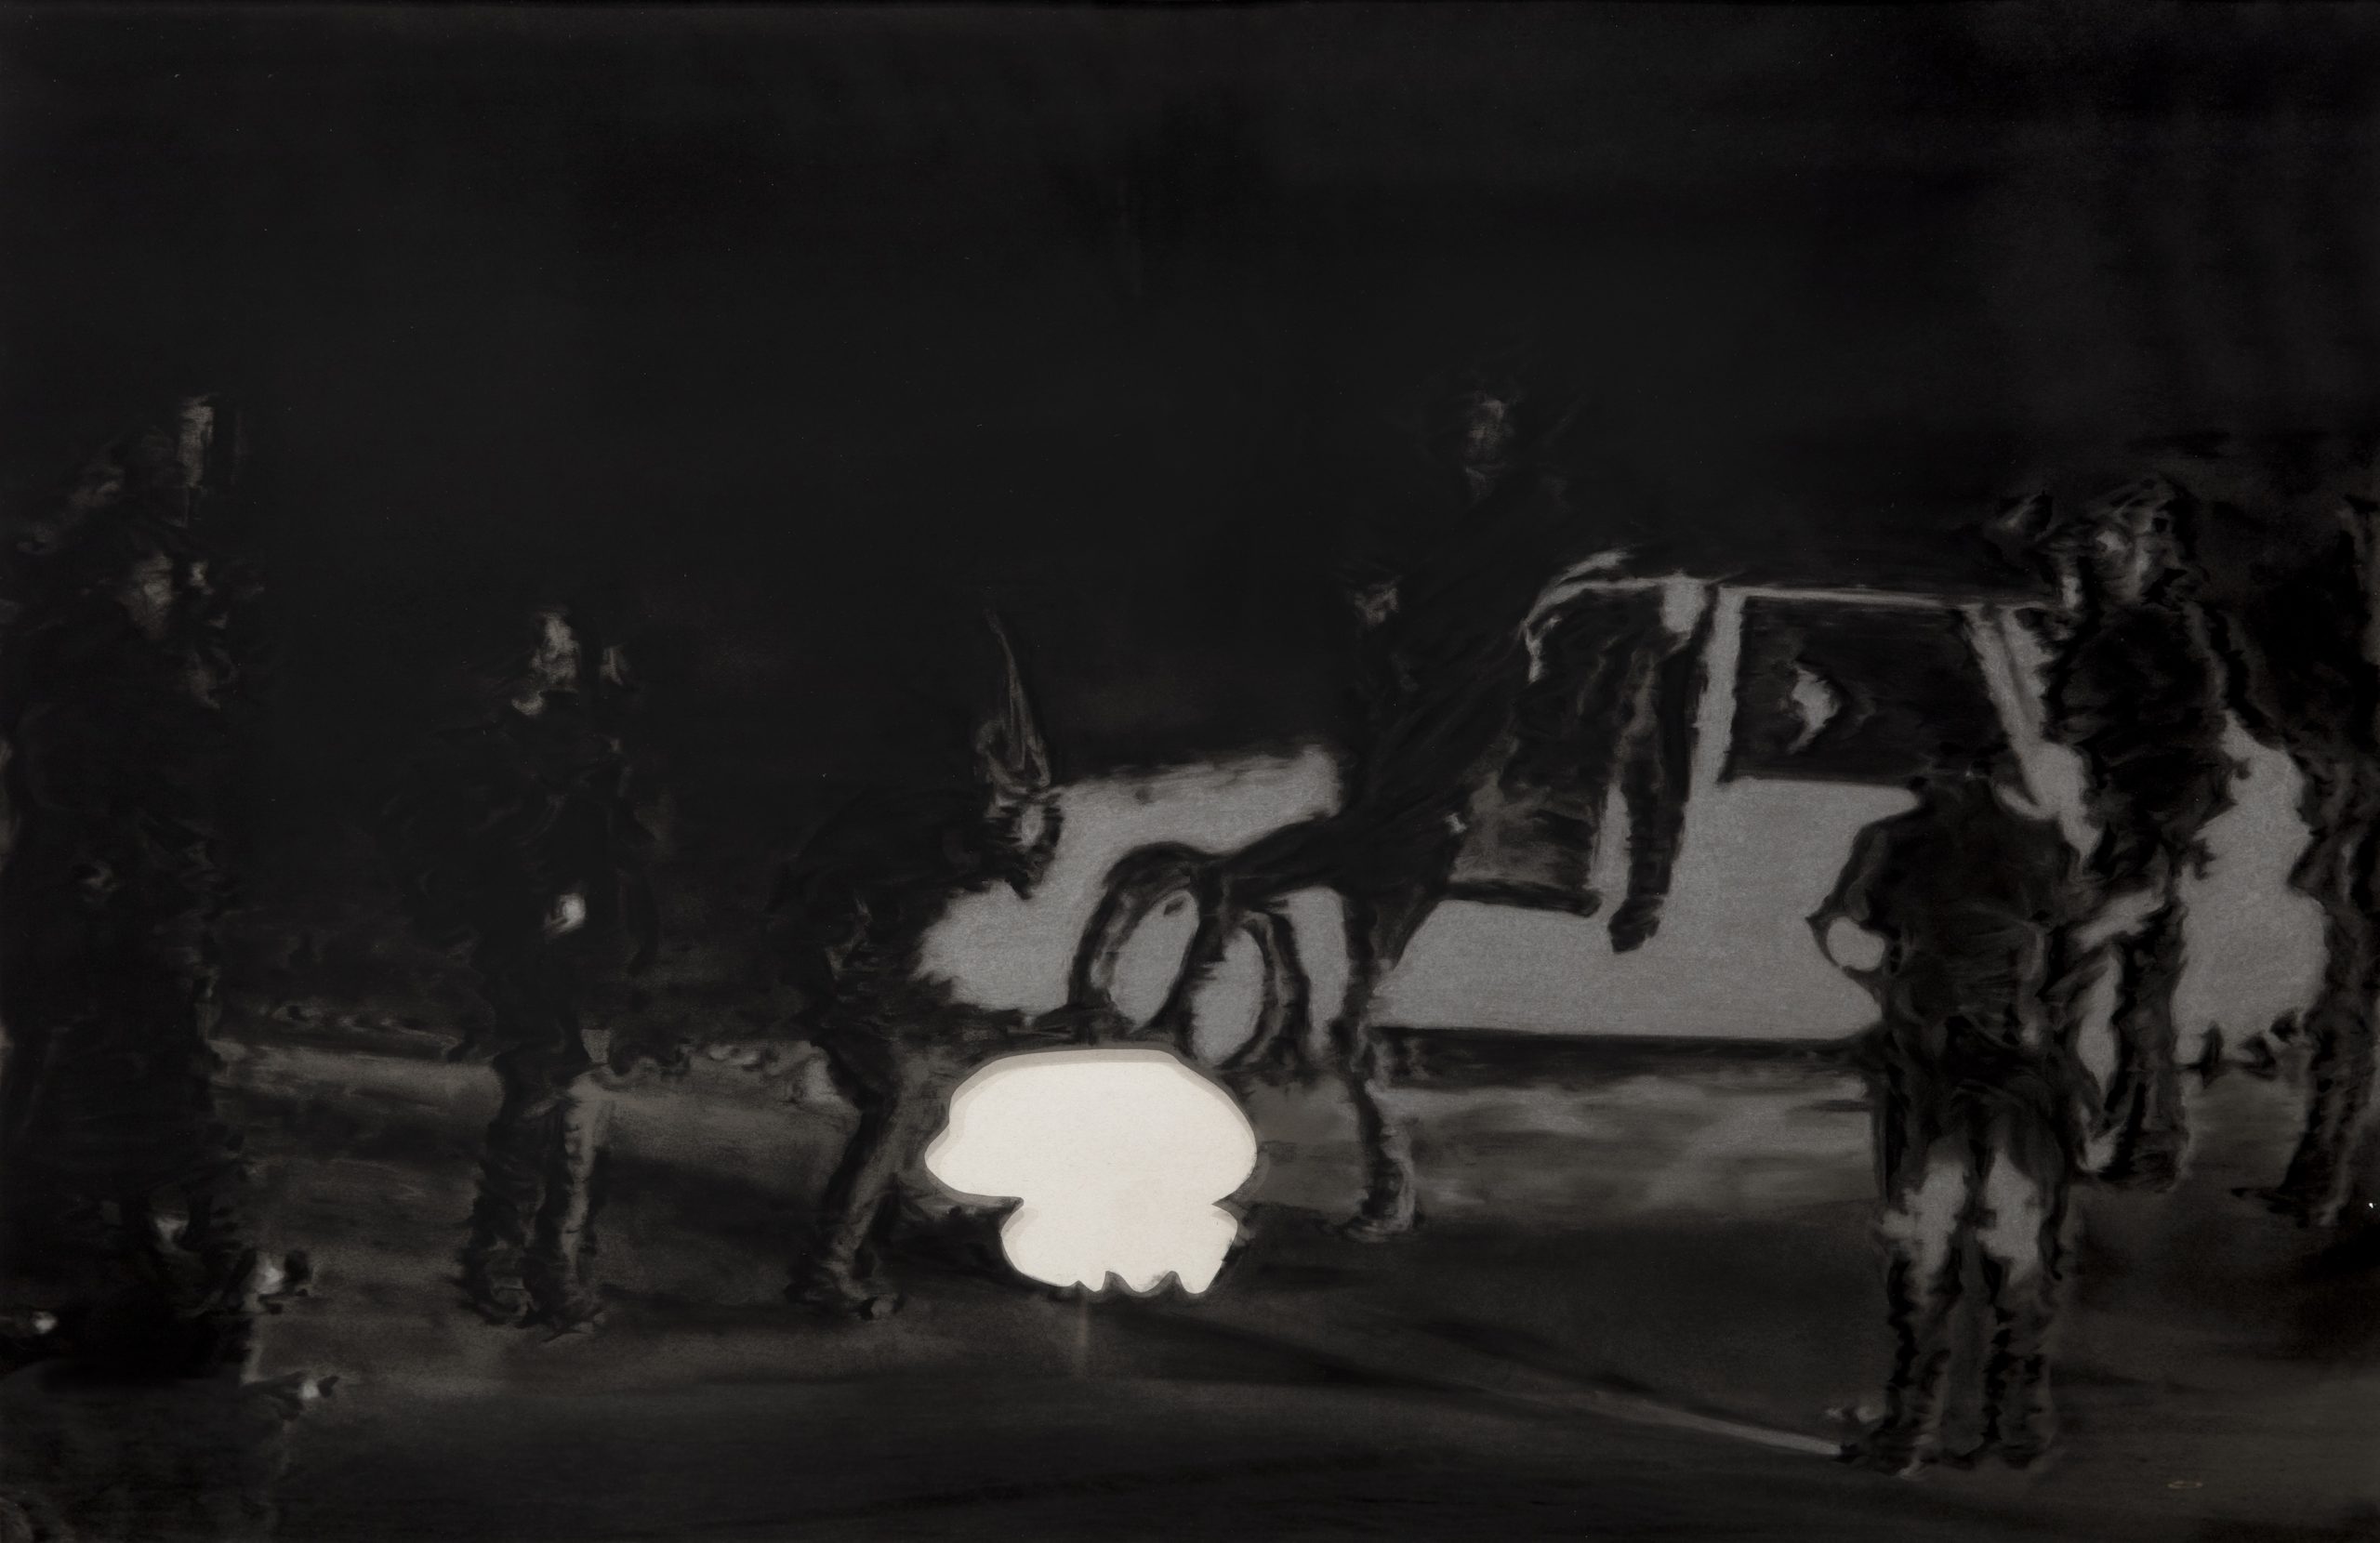 Rodney King - charcoal on paper, with mirrored tint on frame, 30 x 45 in., 2017 